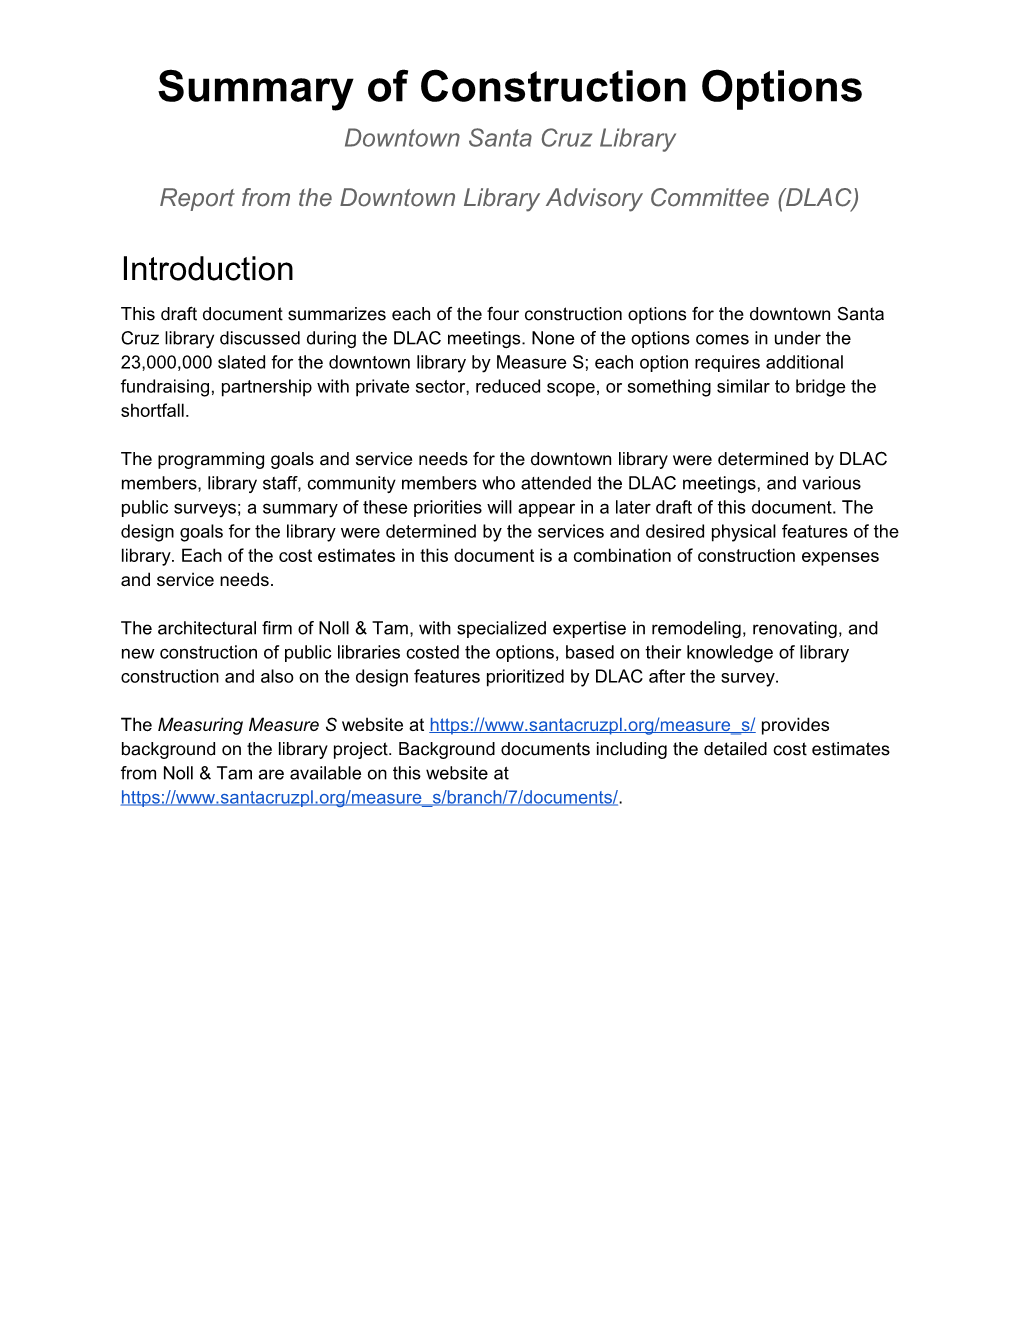 Report from the Downtown Library Advisory Committee (DLAC)